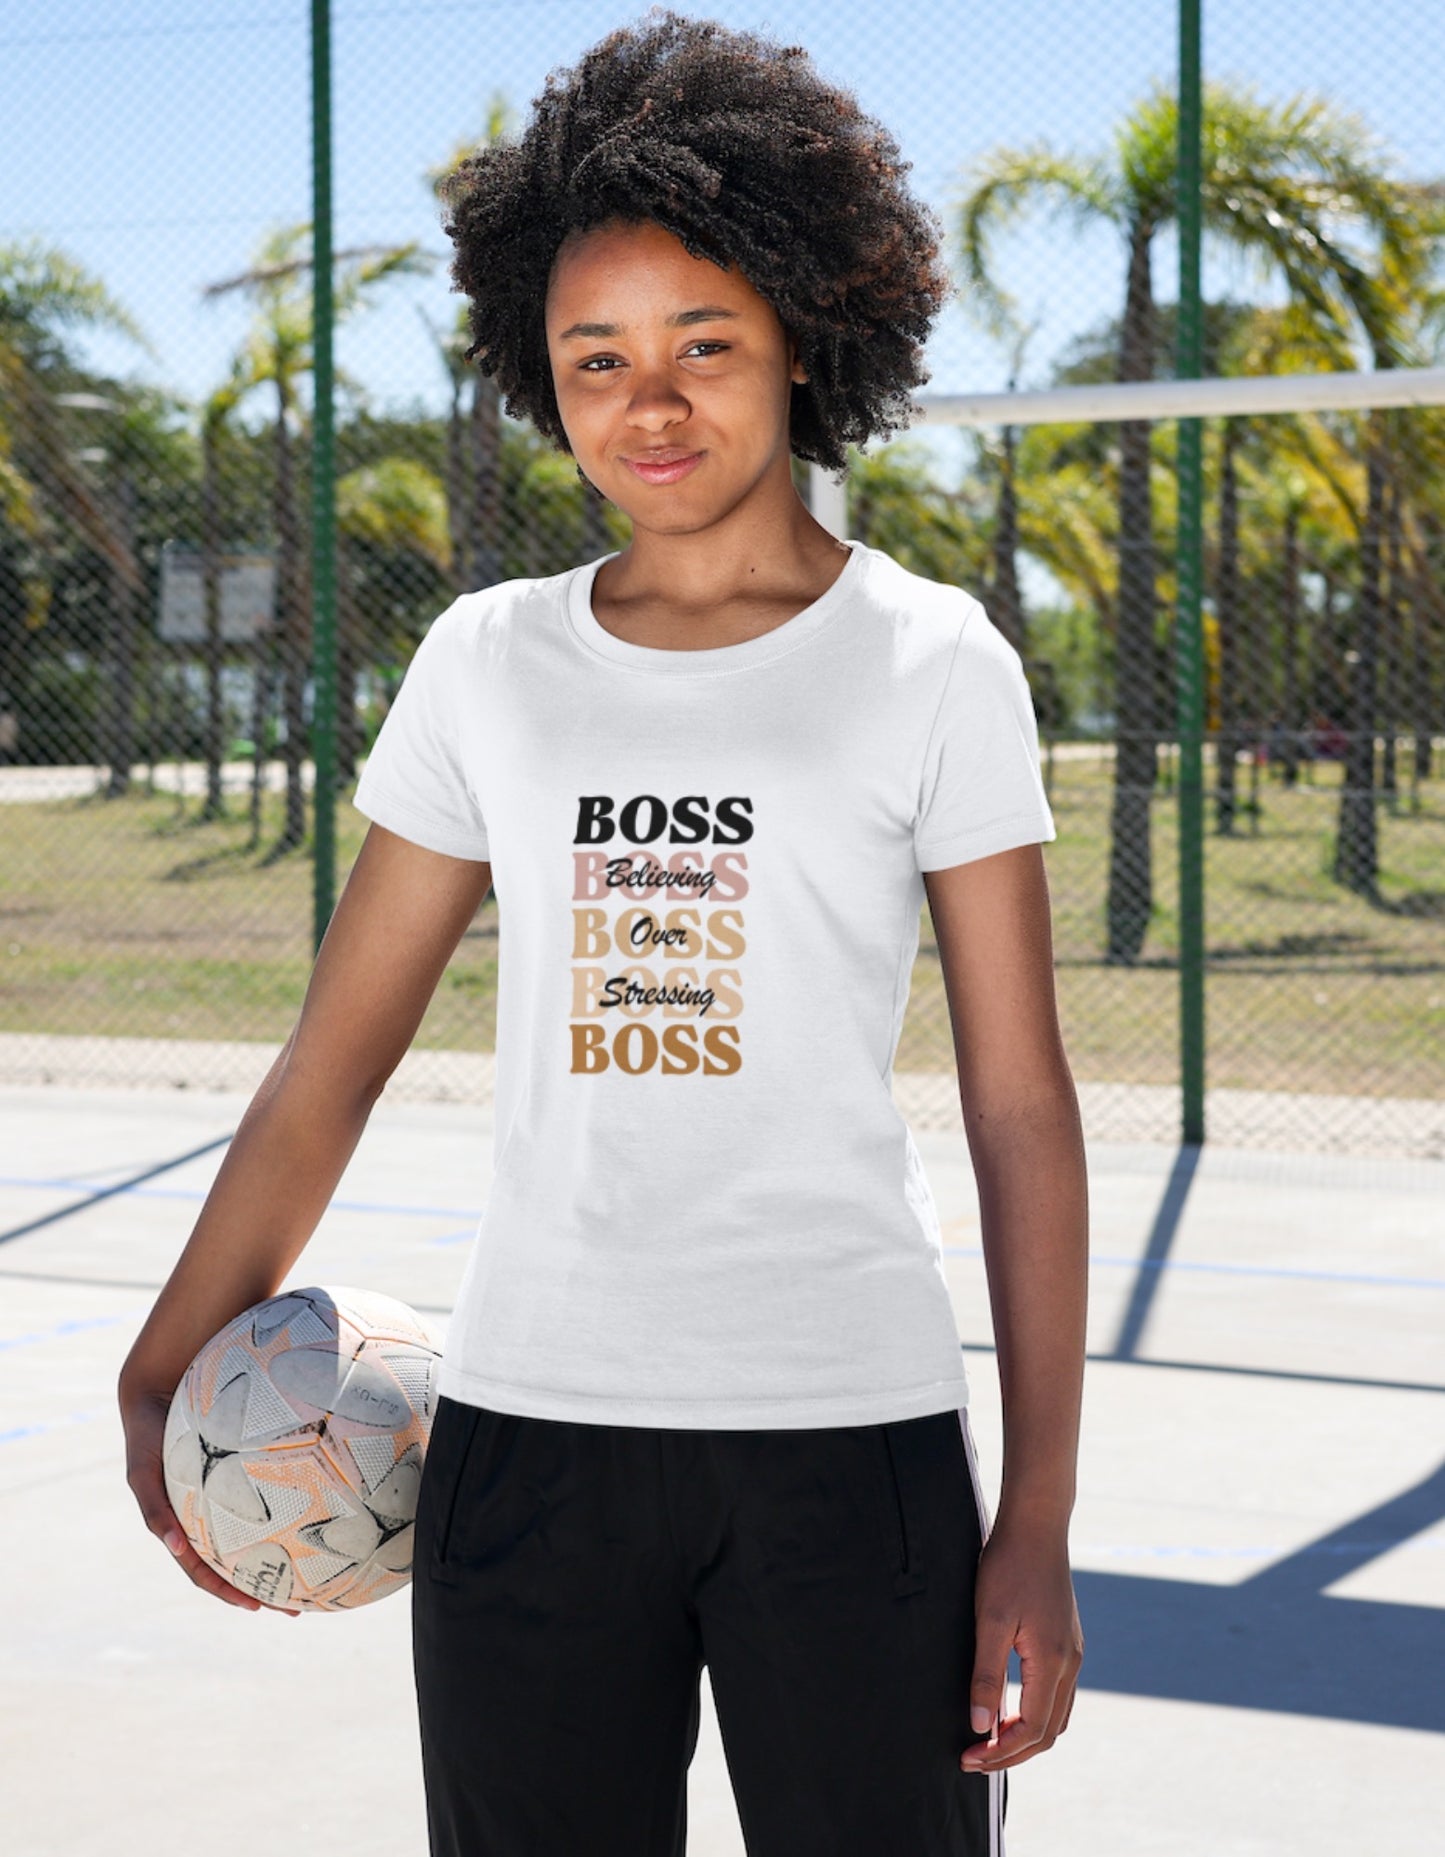 BOSS Ombre Stacked "Believing Over Stressing" Unisex Faith Inspirational T-shirt in Various Colors T Styles Online